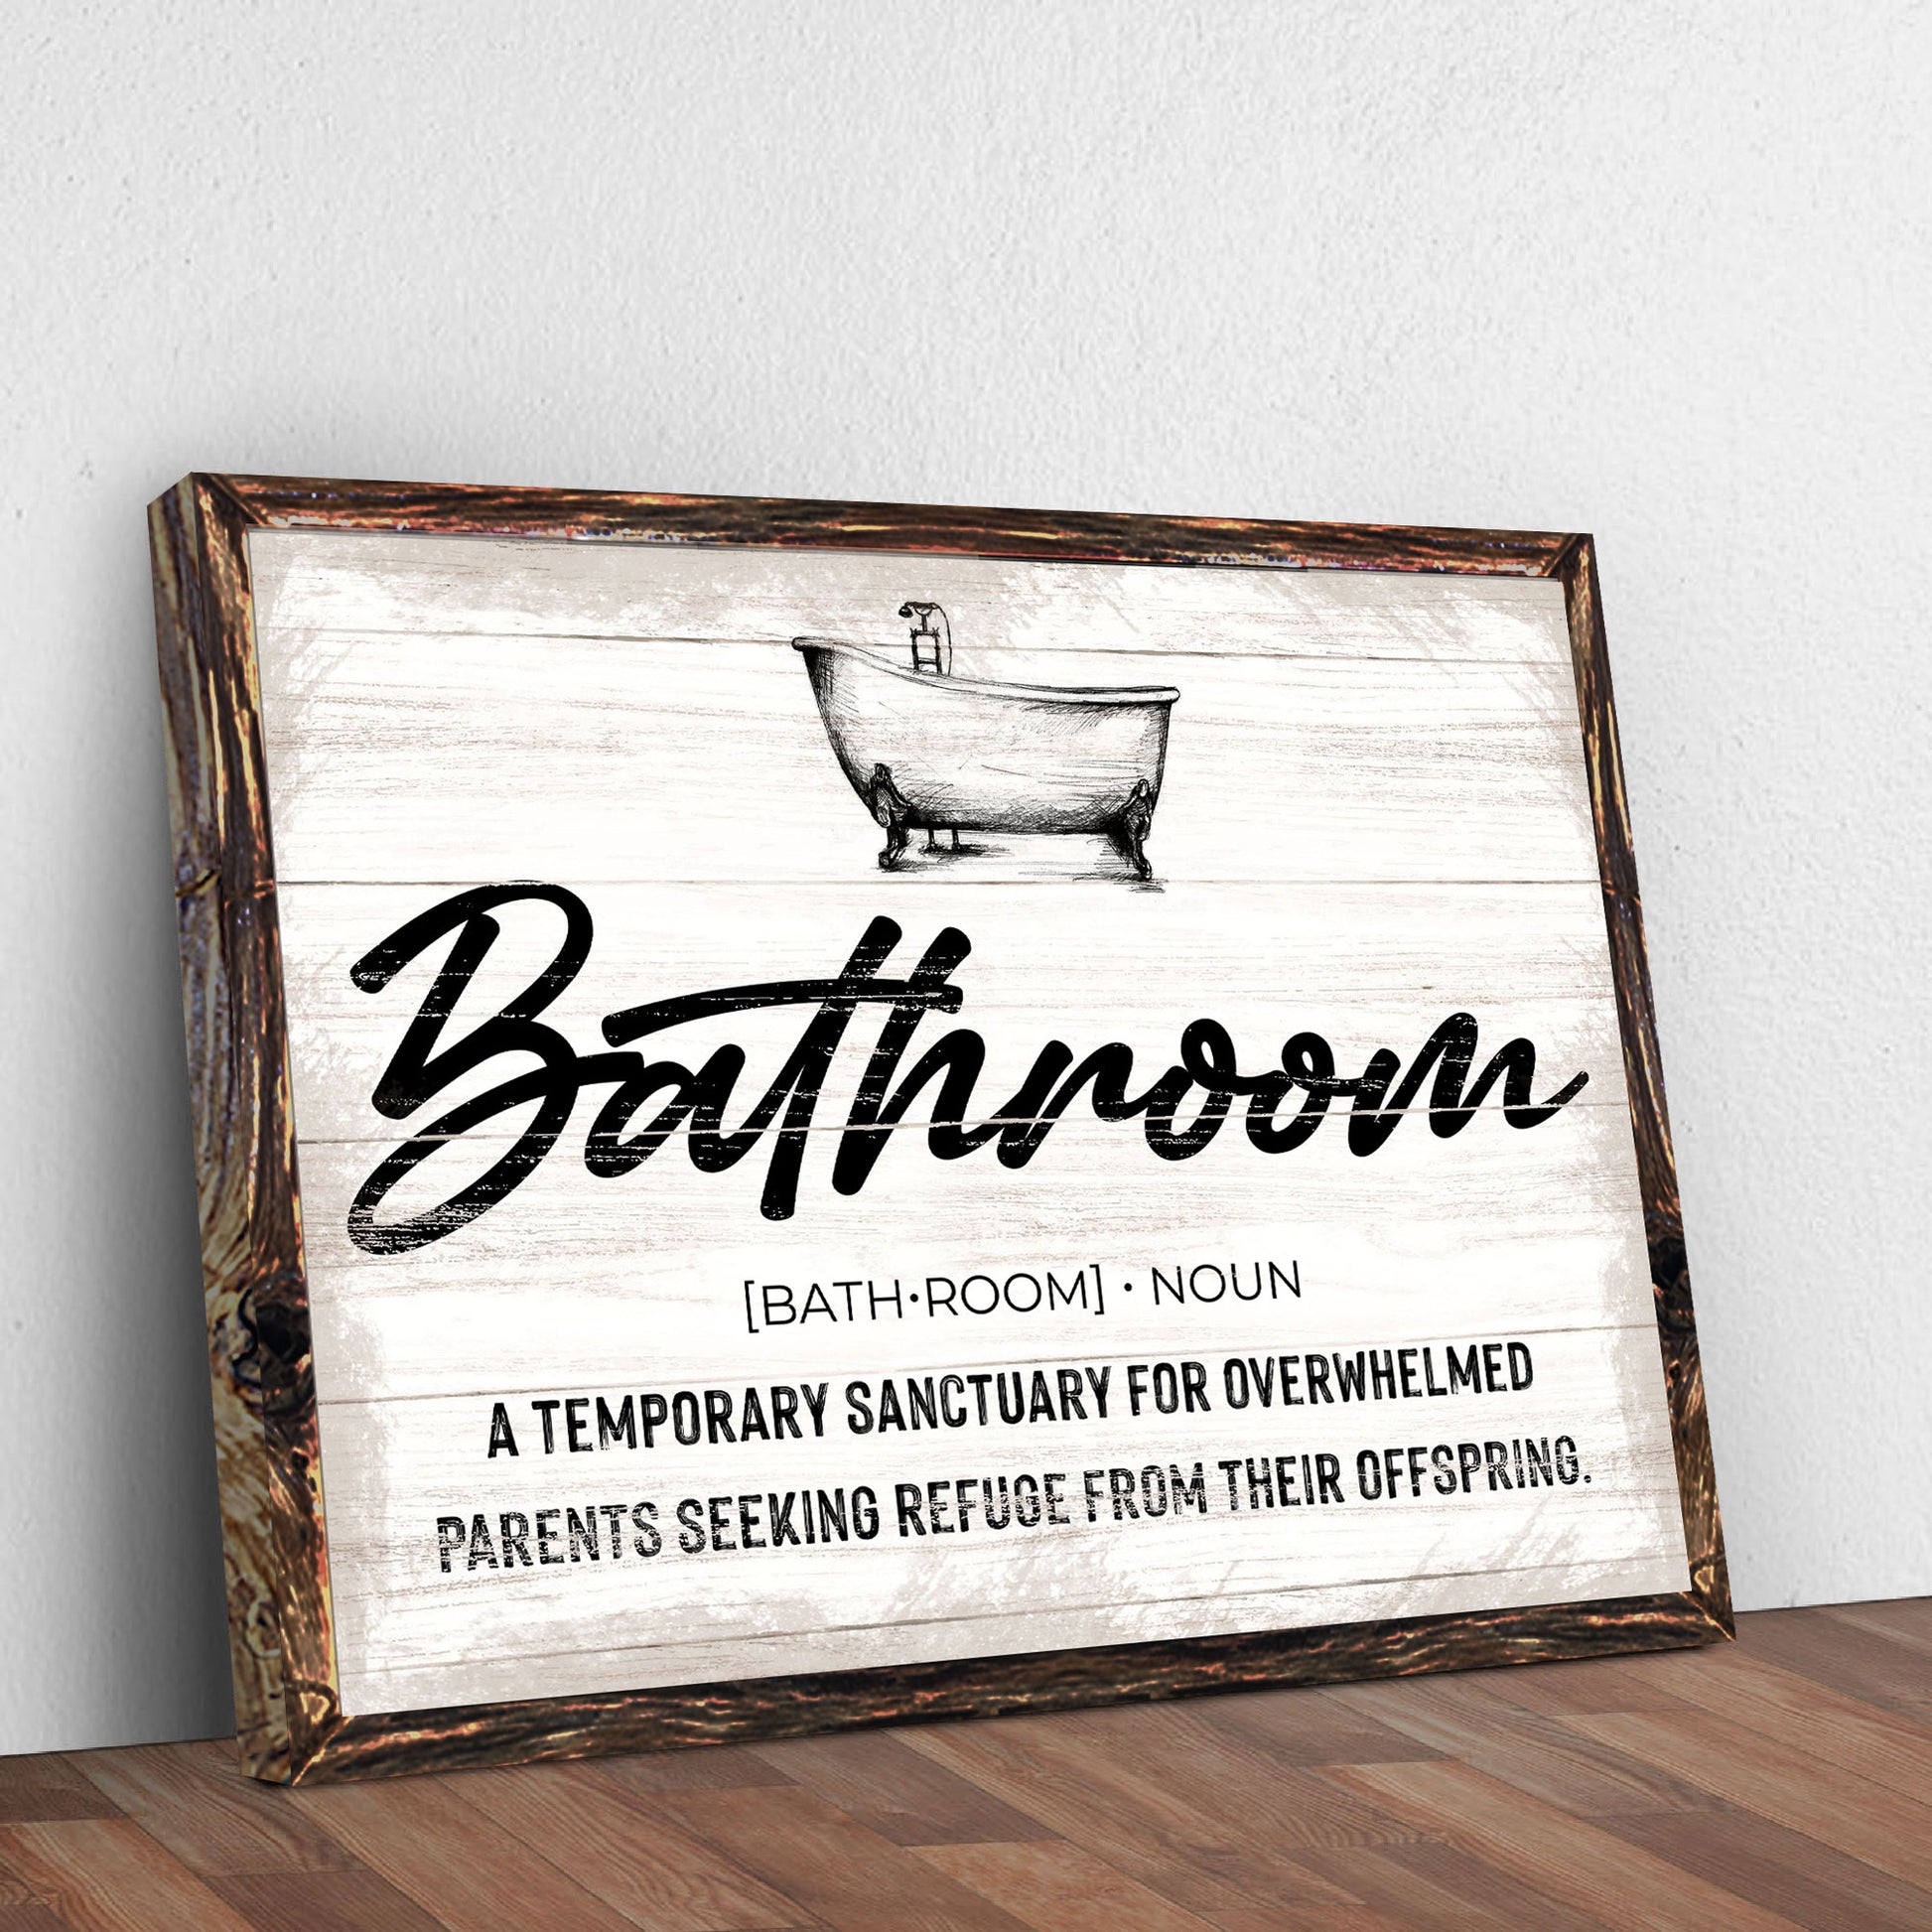 Bathroom Sign II - Image by Tailored Canvases